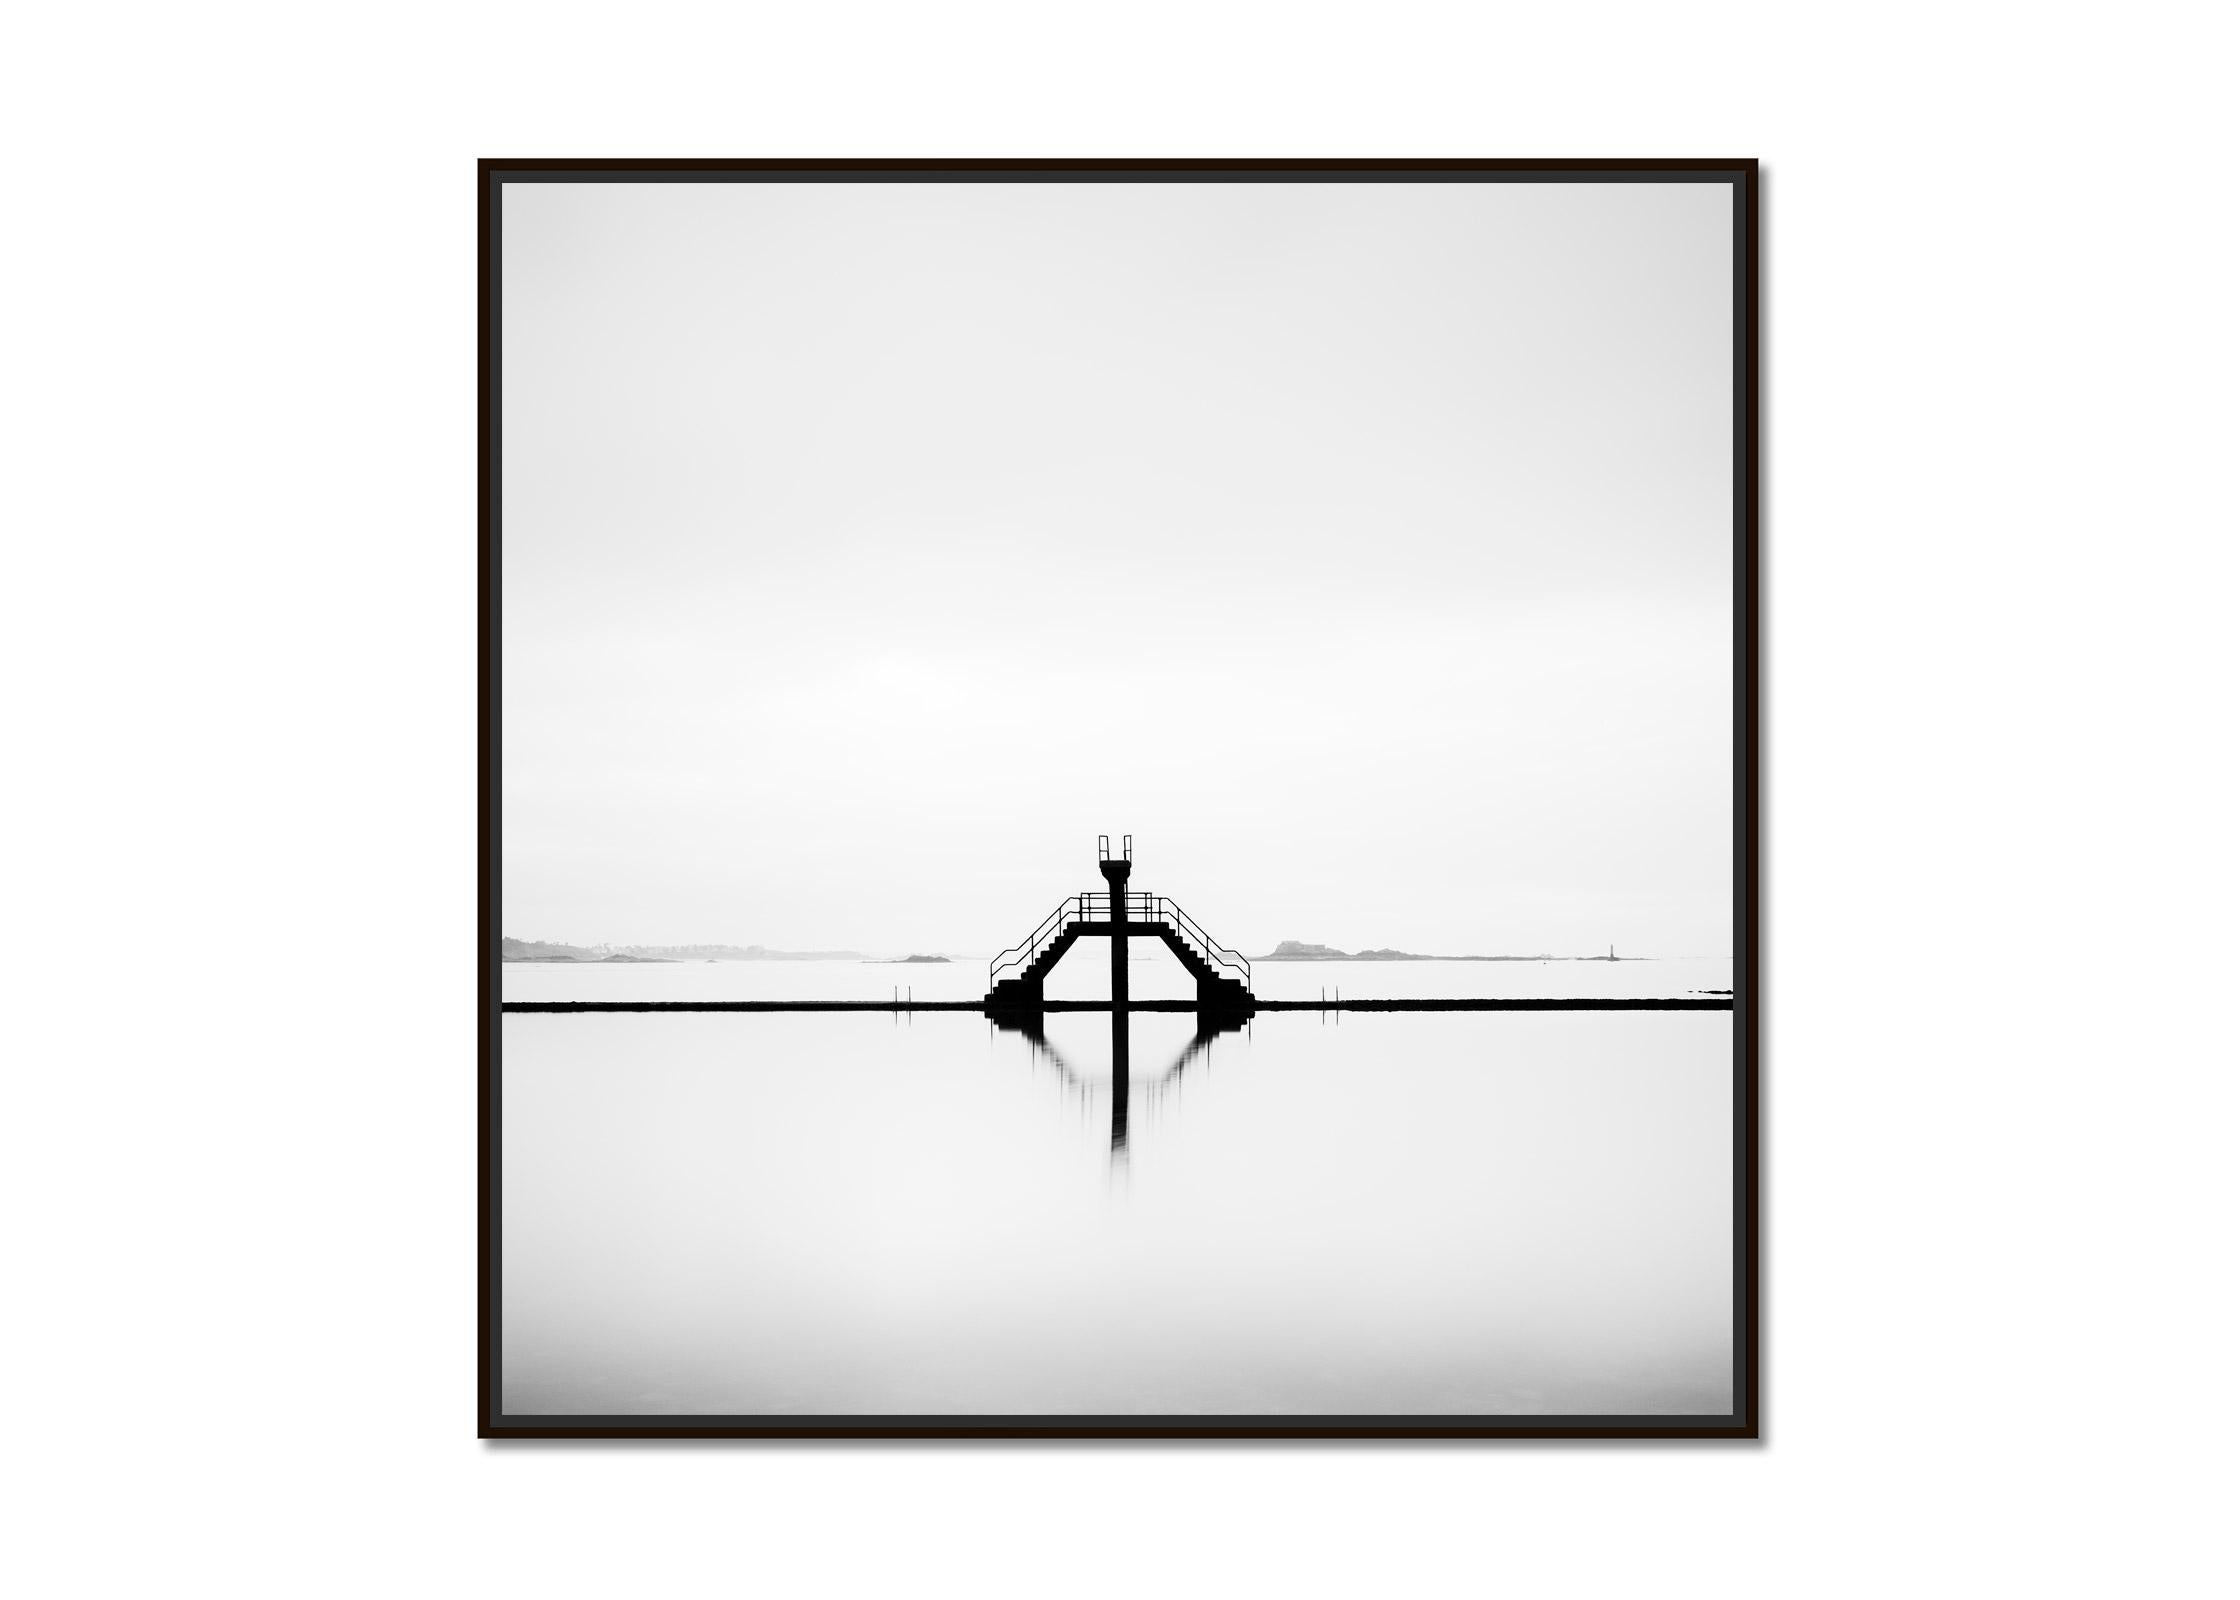 Diving Platform, Seawater swimming Pool, Saint Malo, black and white photography - Photograph by Gerald Berghammer